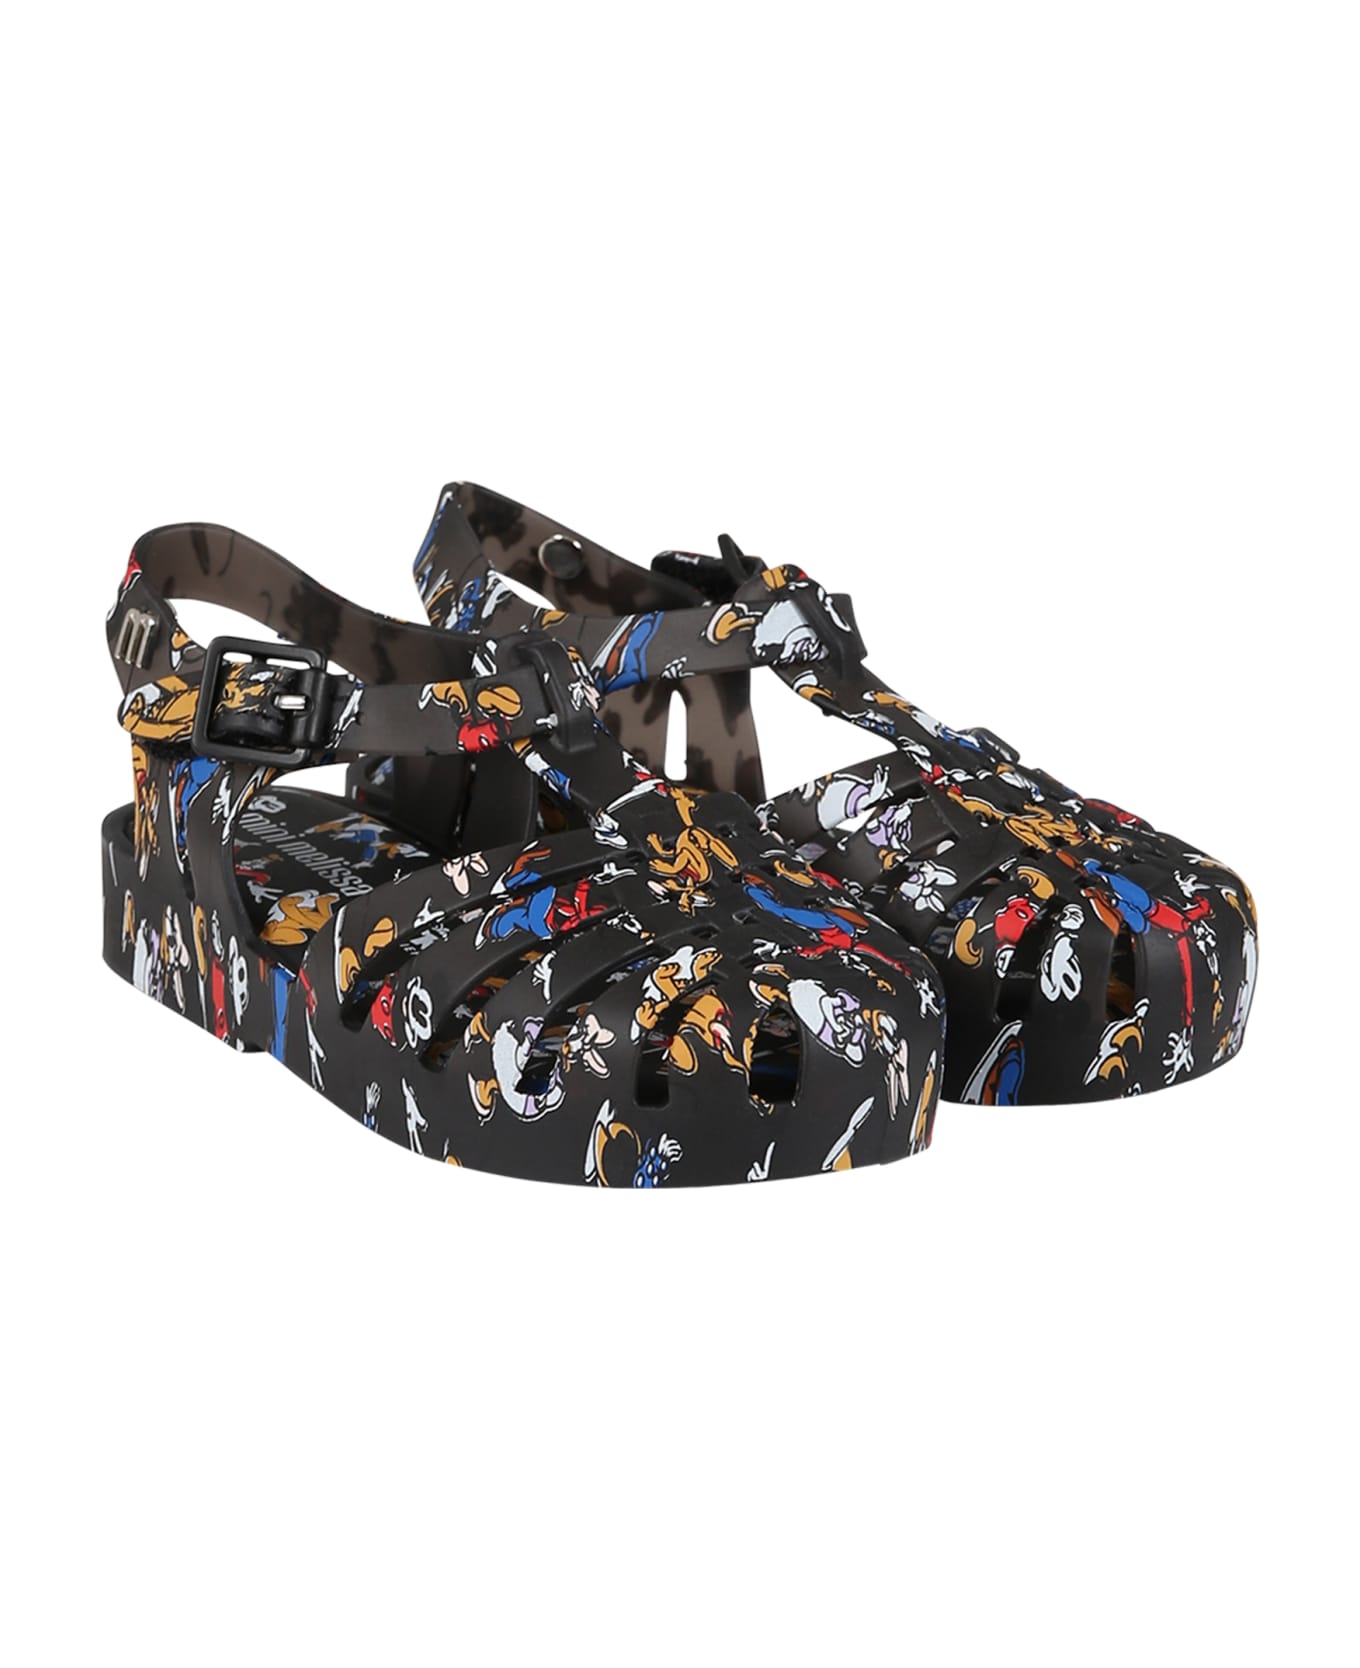 Melissa Black Sandals For Boy With Disney Characters - Black シューズ